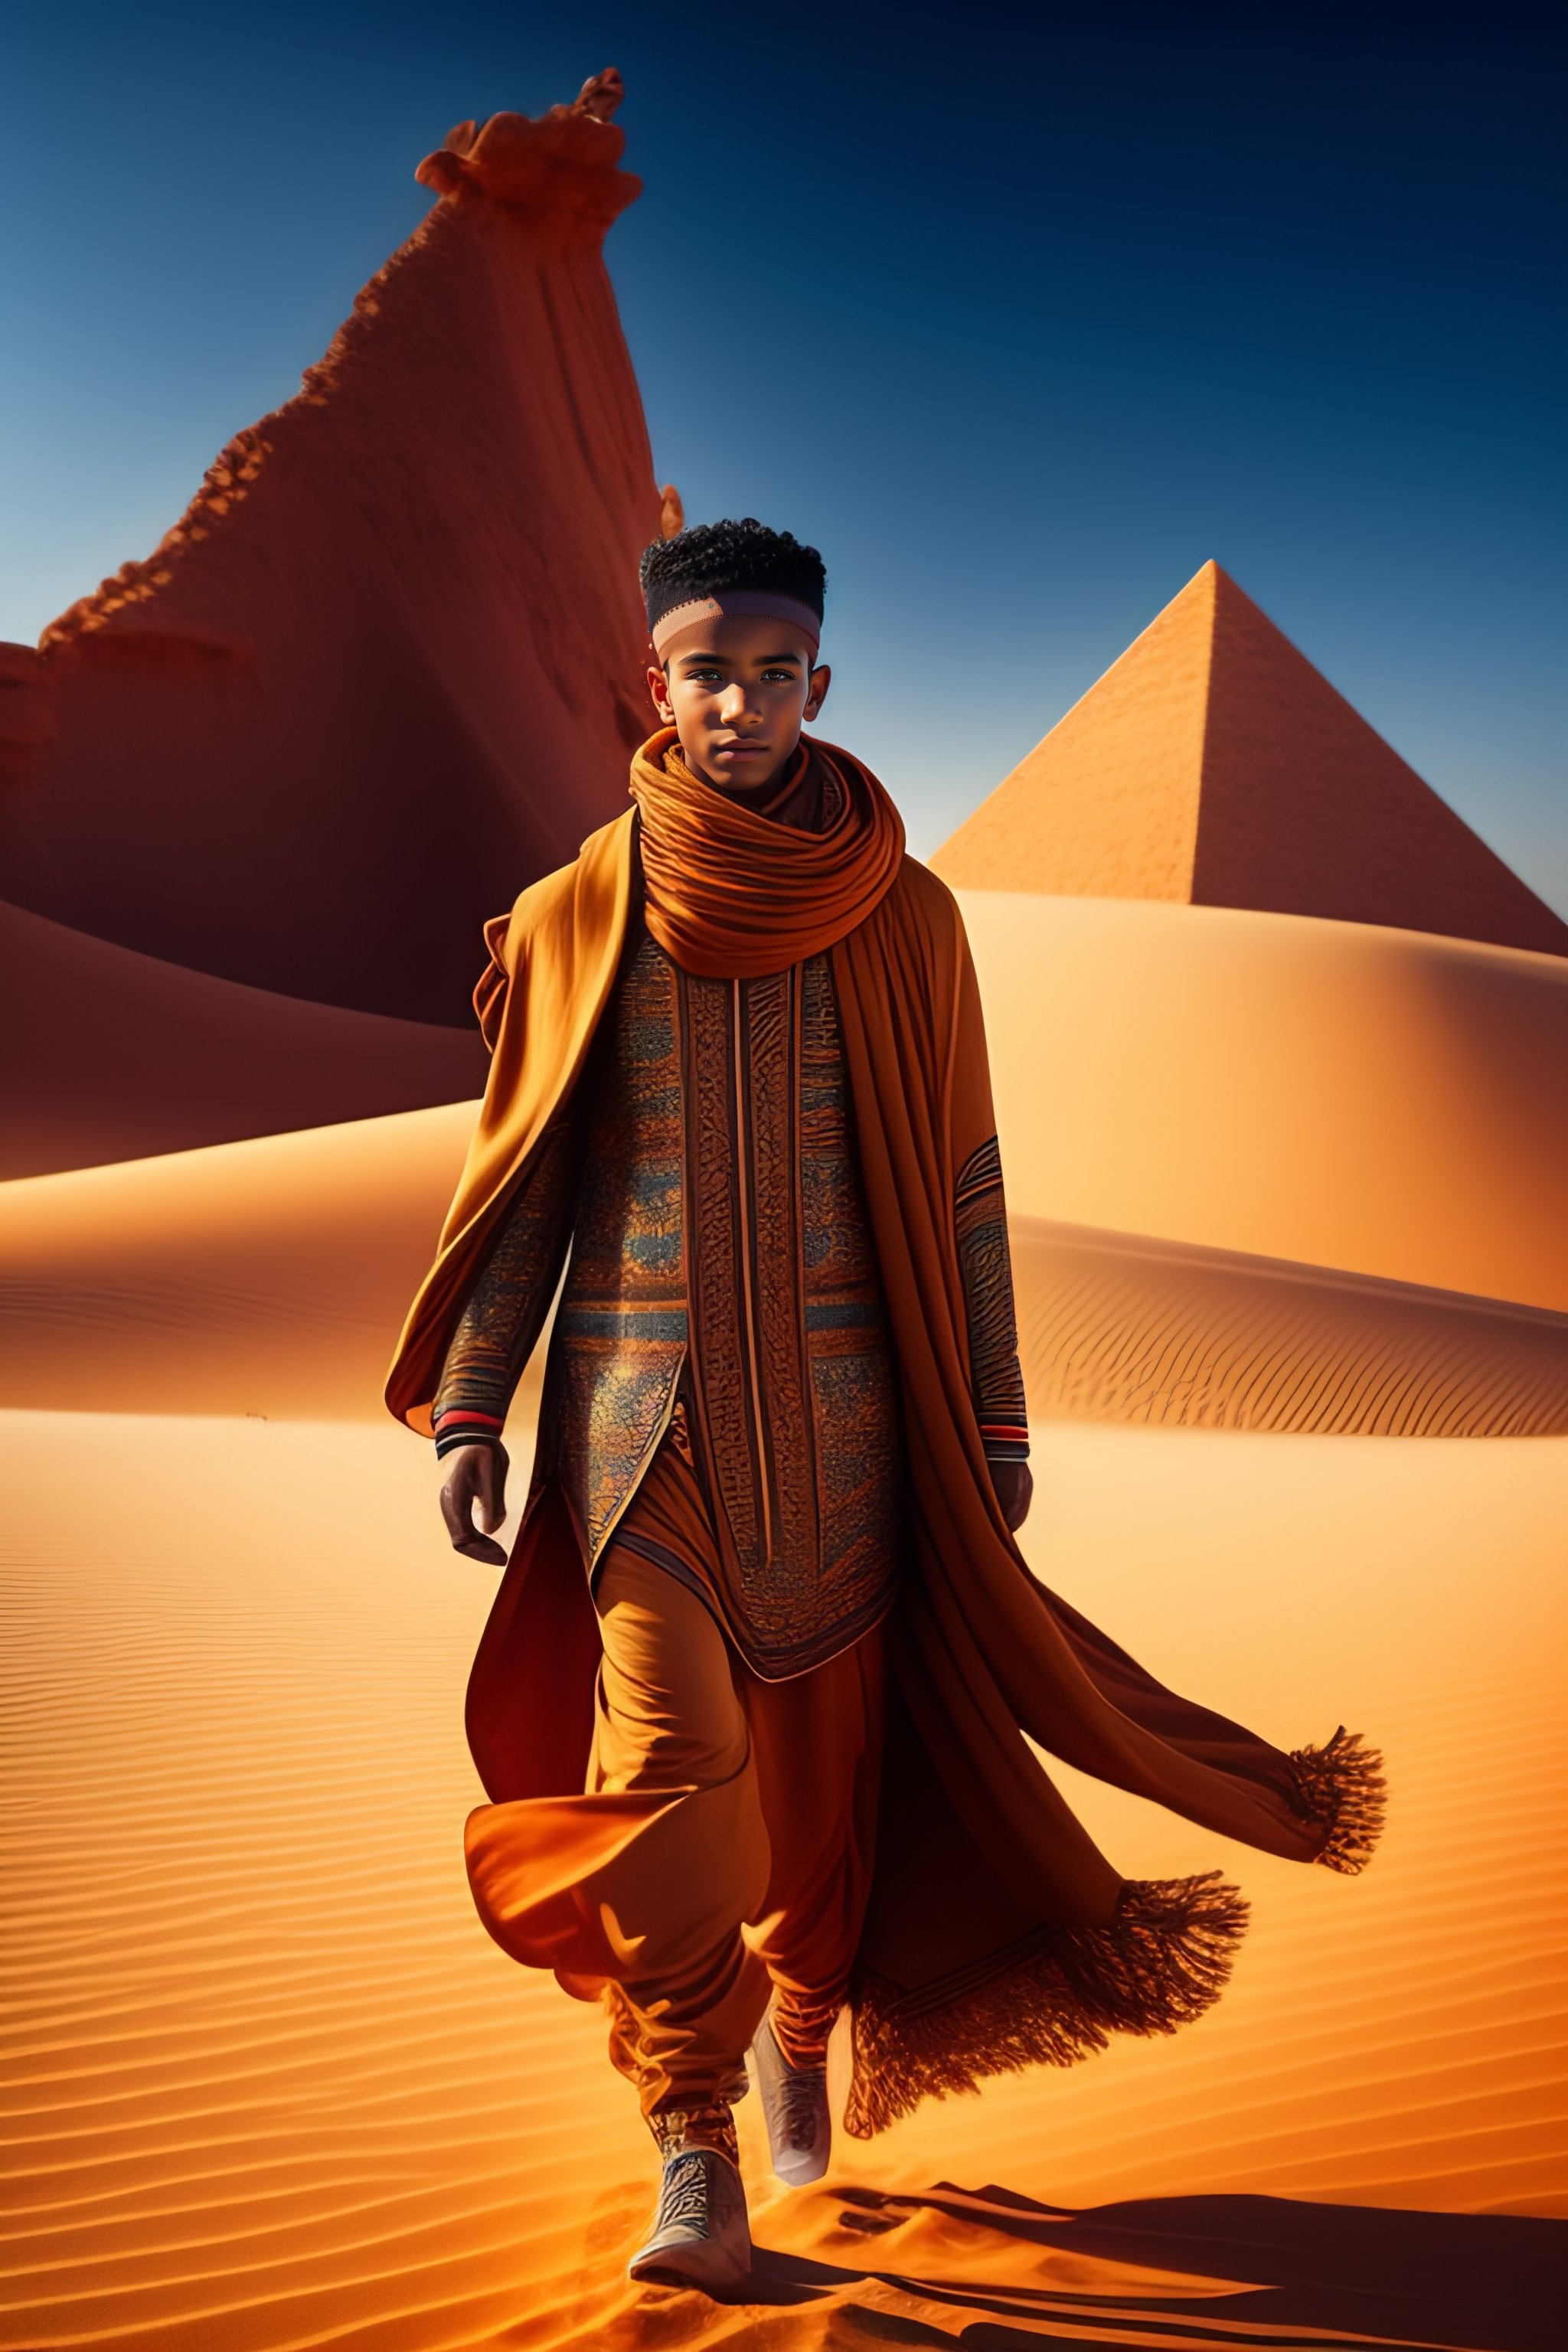 Lexica - Futuristic, young boy wear moroccan clothes and